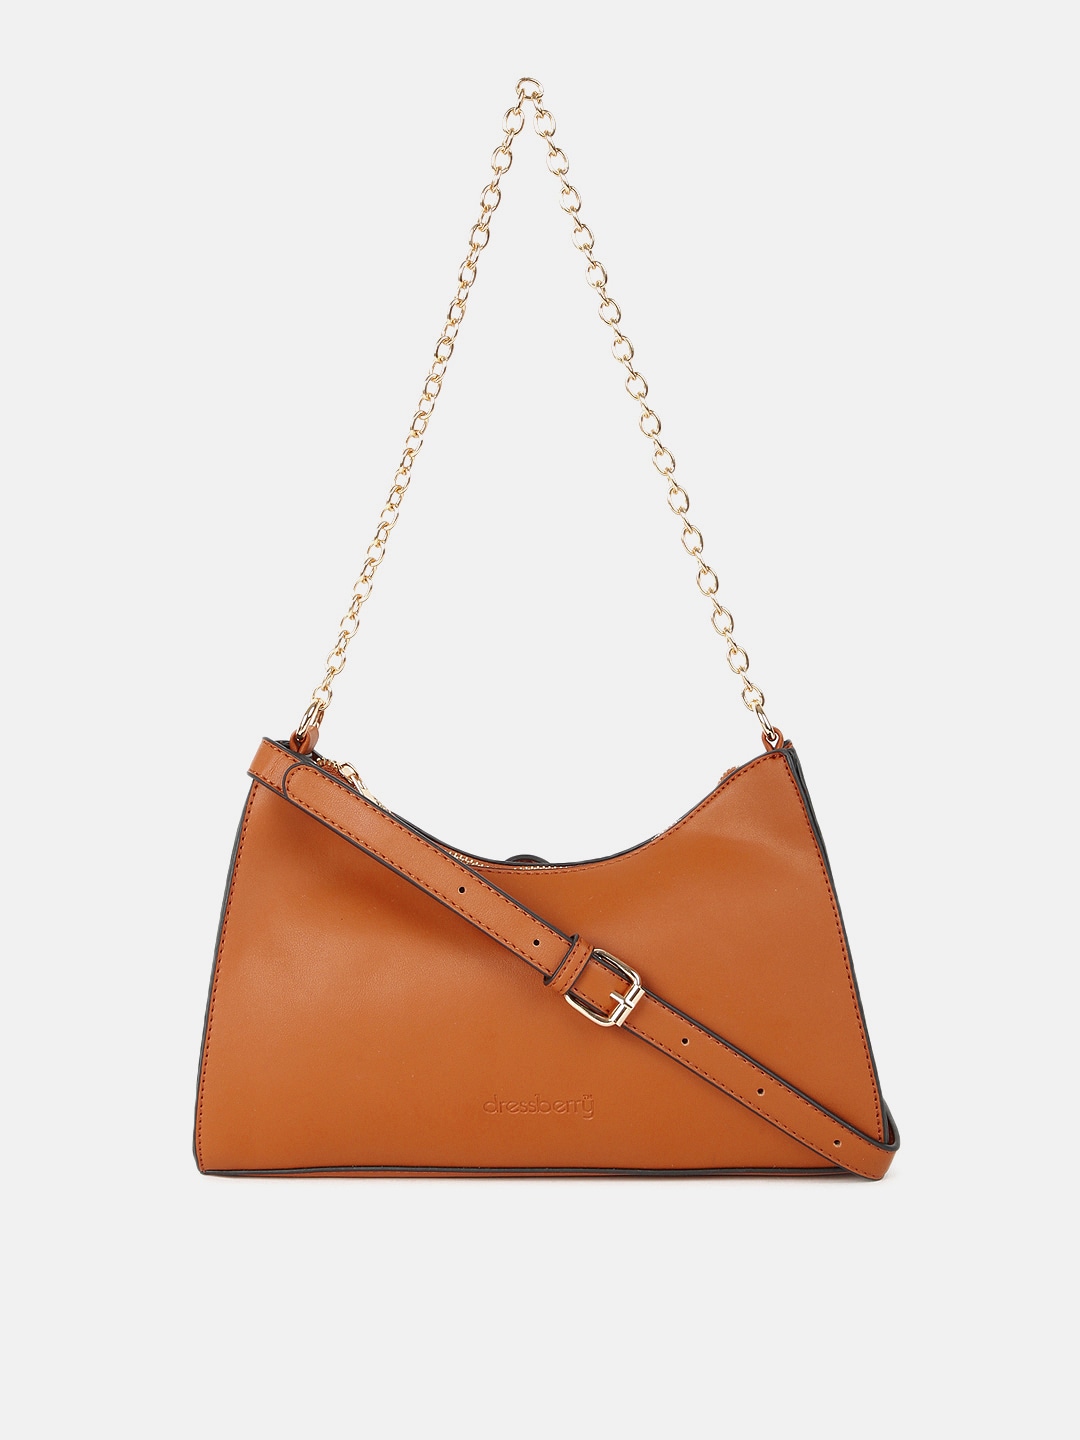 DressBerry Tan Brown Structured Shoulder Bag Price in India